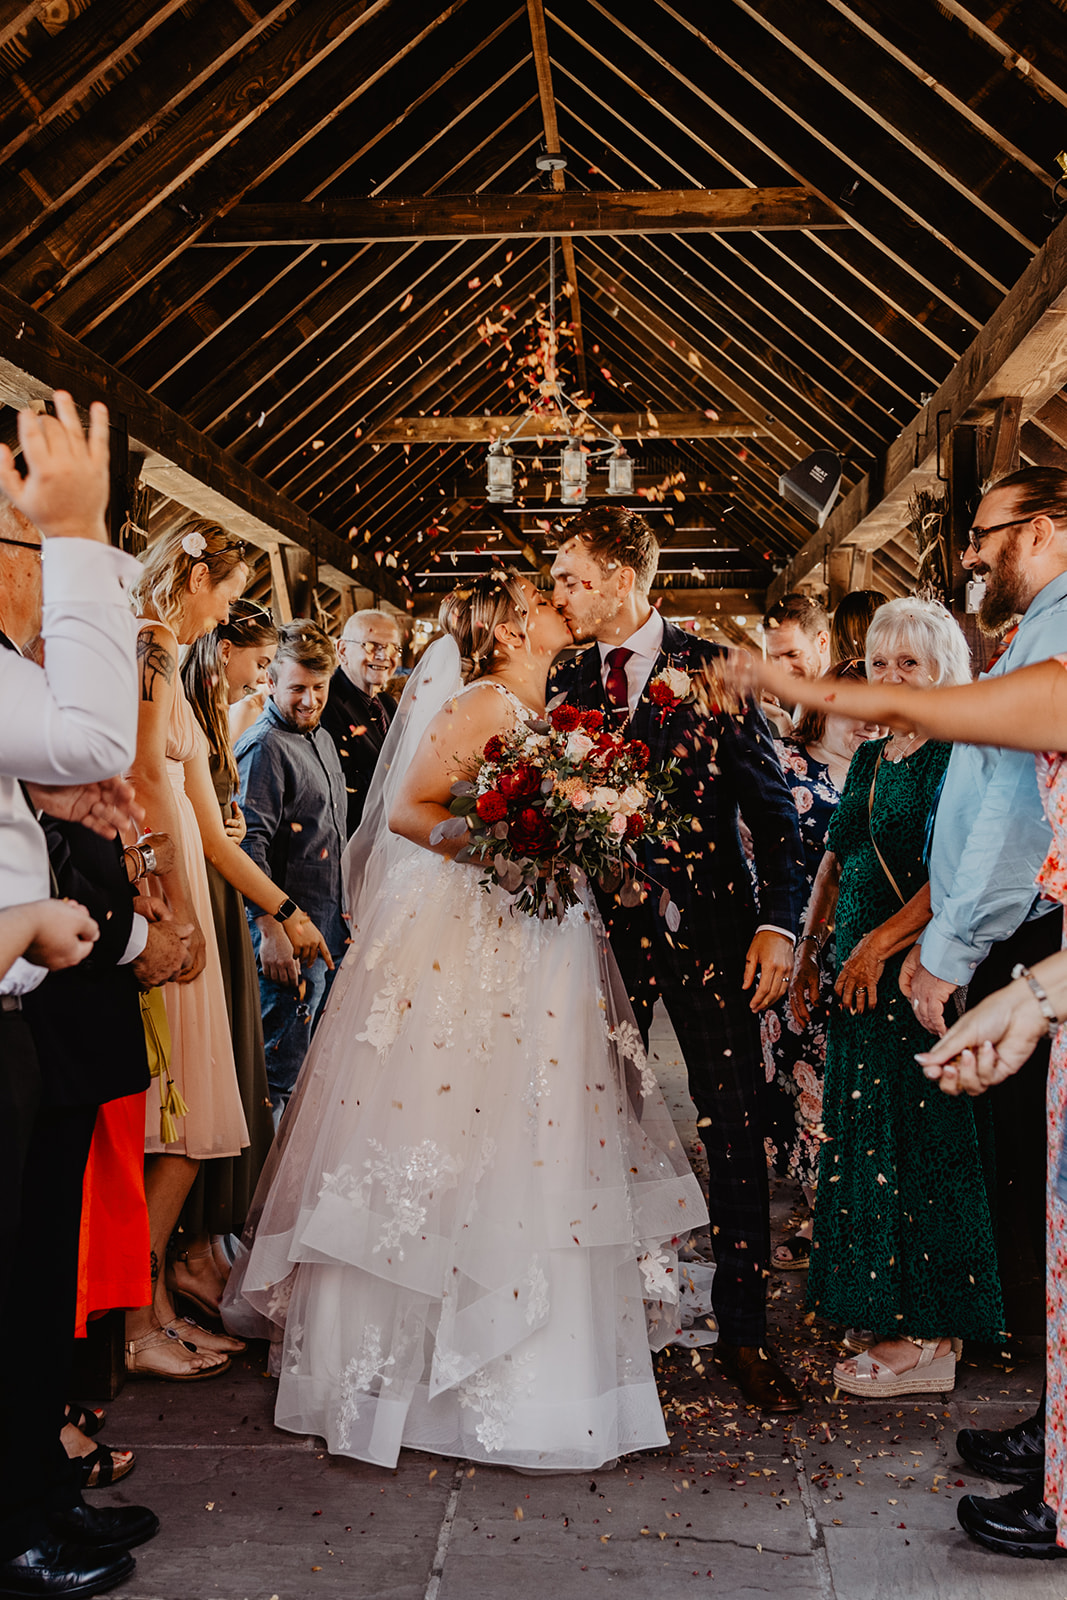 Bride and groom under confetti at a wedding at Long Furlong Barn, Sussex. By OliveJoy Photography.